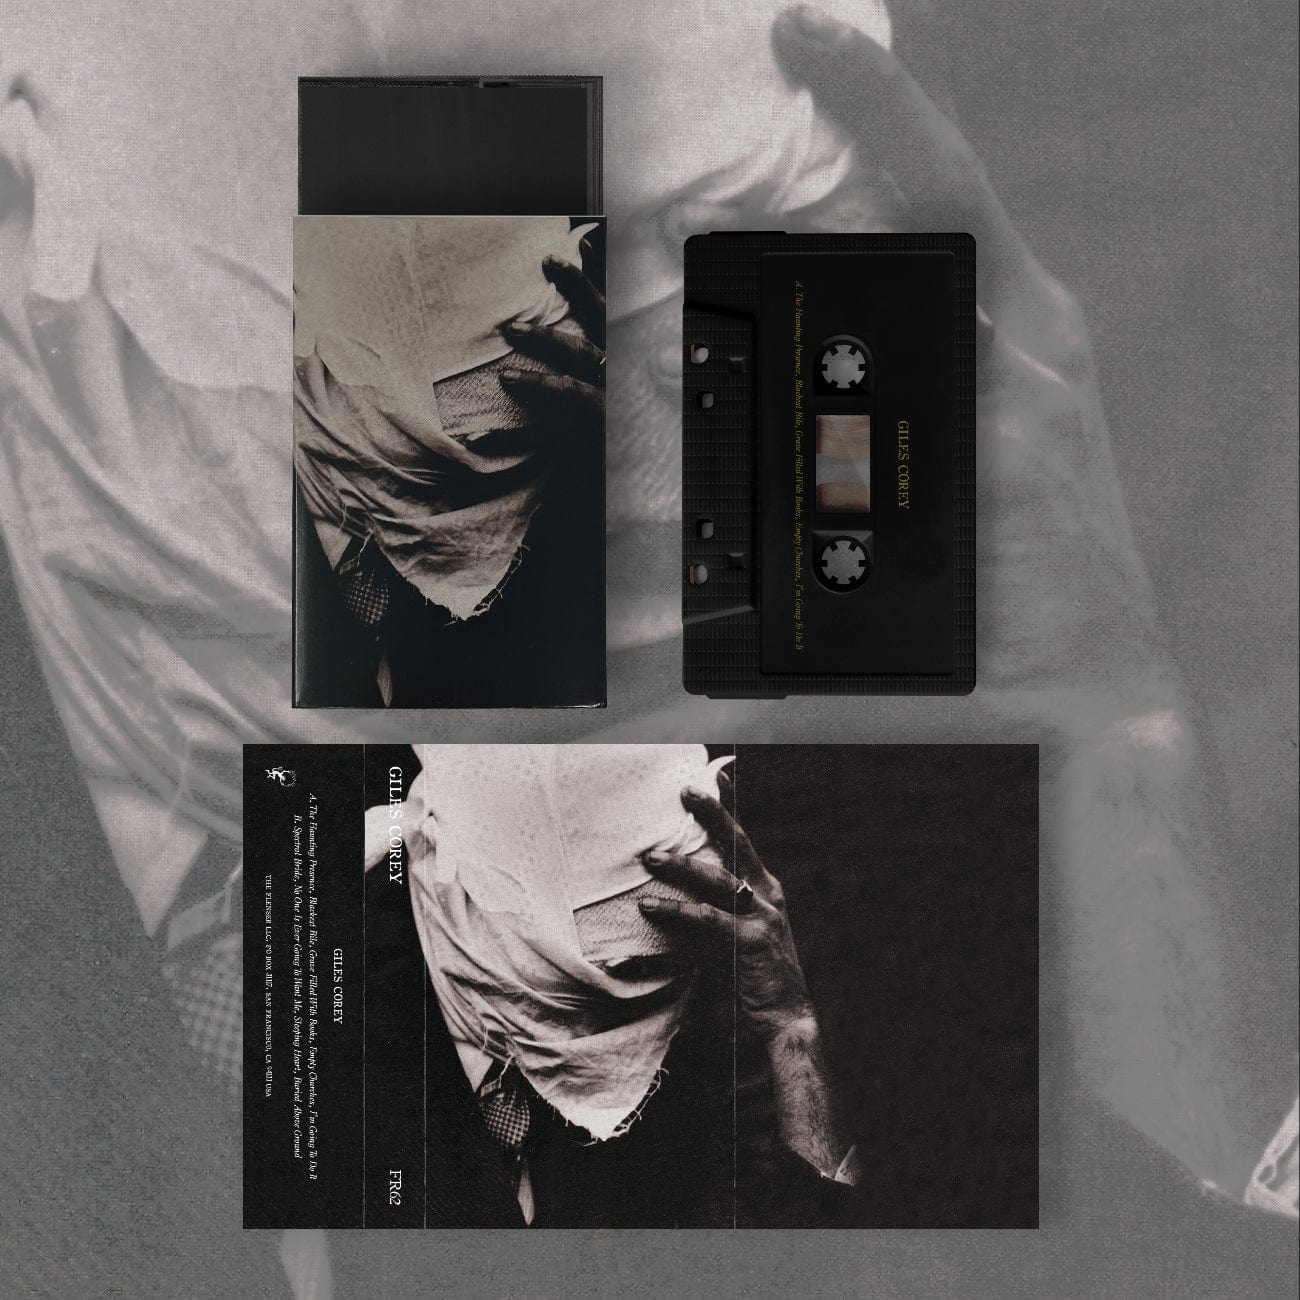 The Flenser Tapes Giles Corey "Giles Corey" Tape